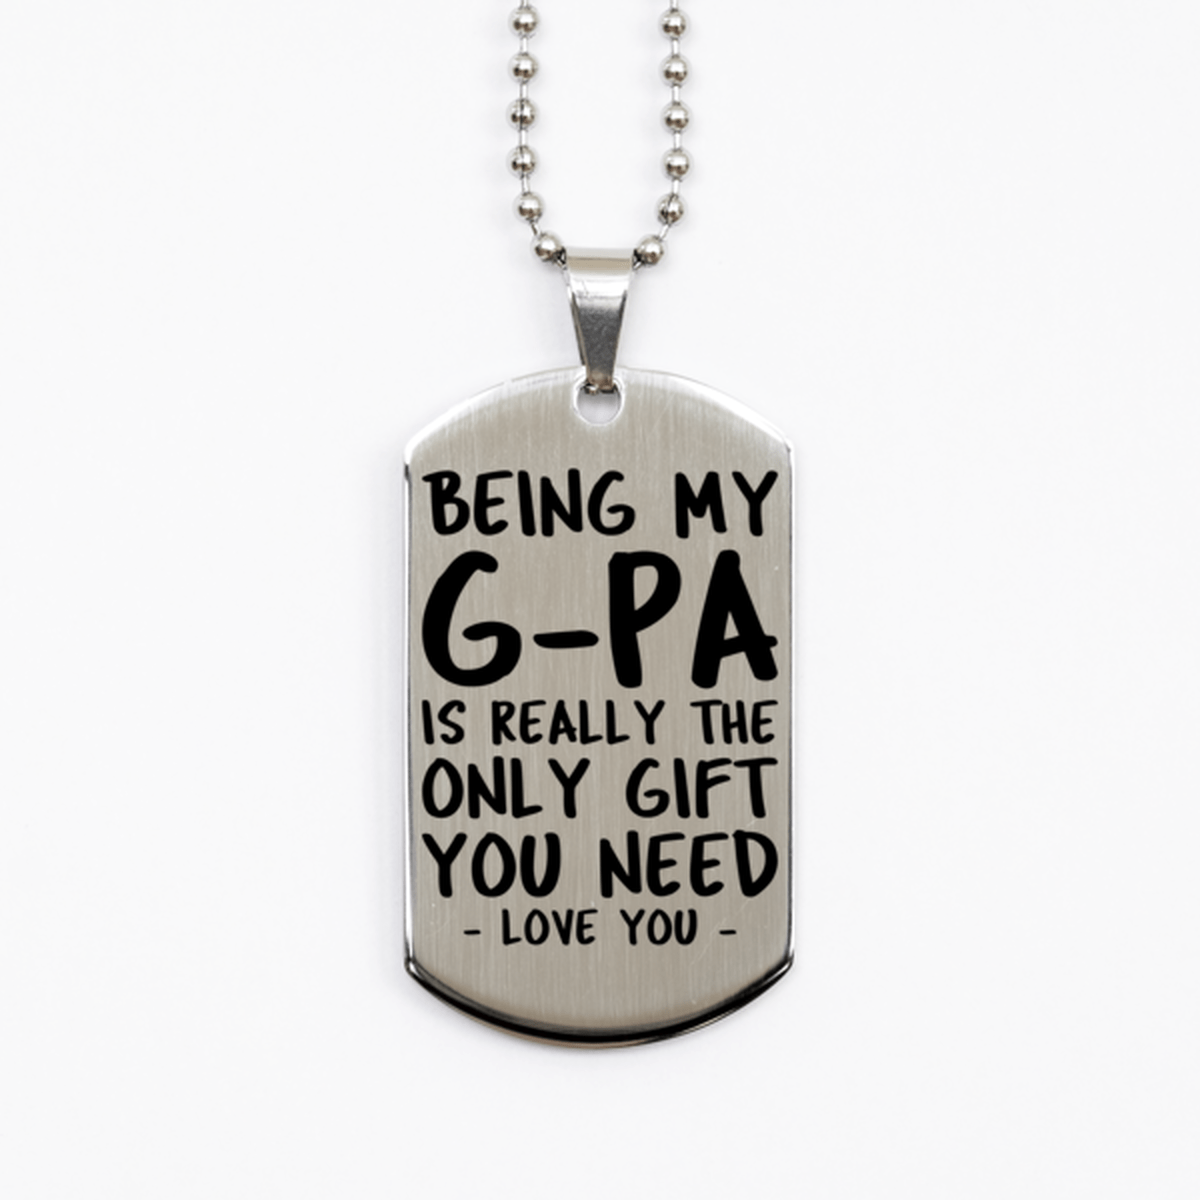 Funny G-pa Silver Dog Tag Necklace, Being My G-pa Is Really the Only Gift You Need, Best Birthday Gifts for G-pa